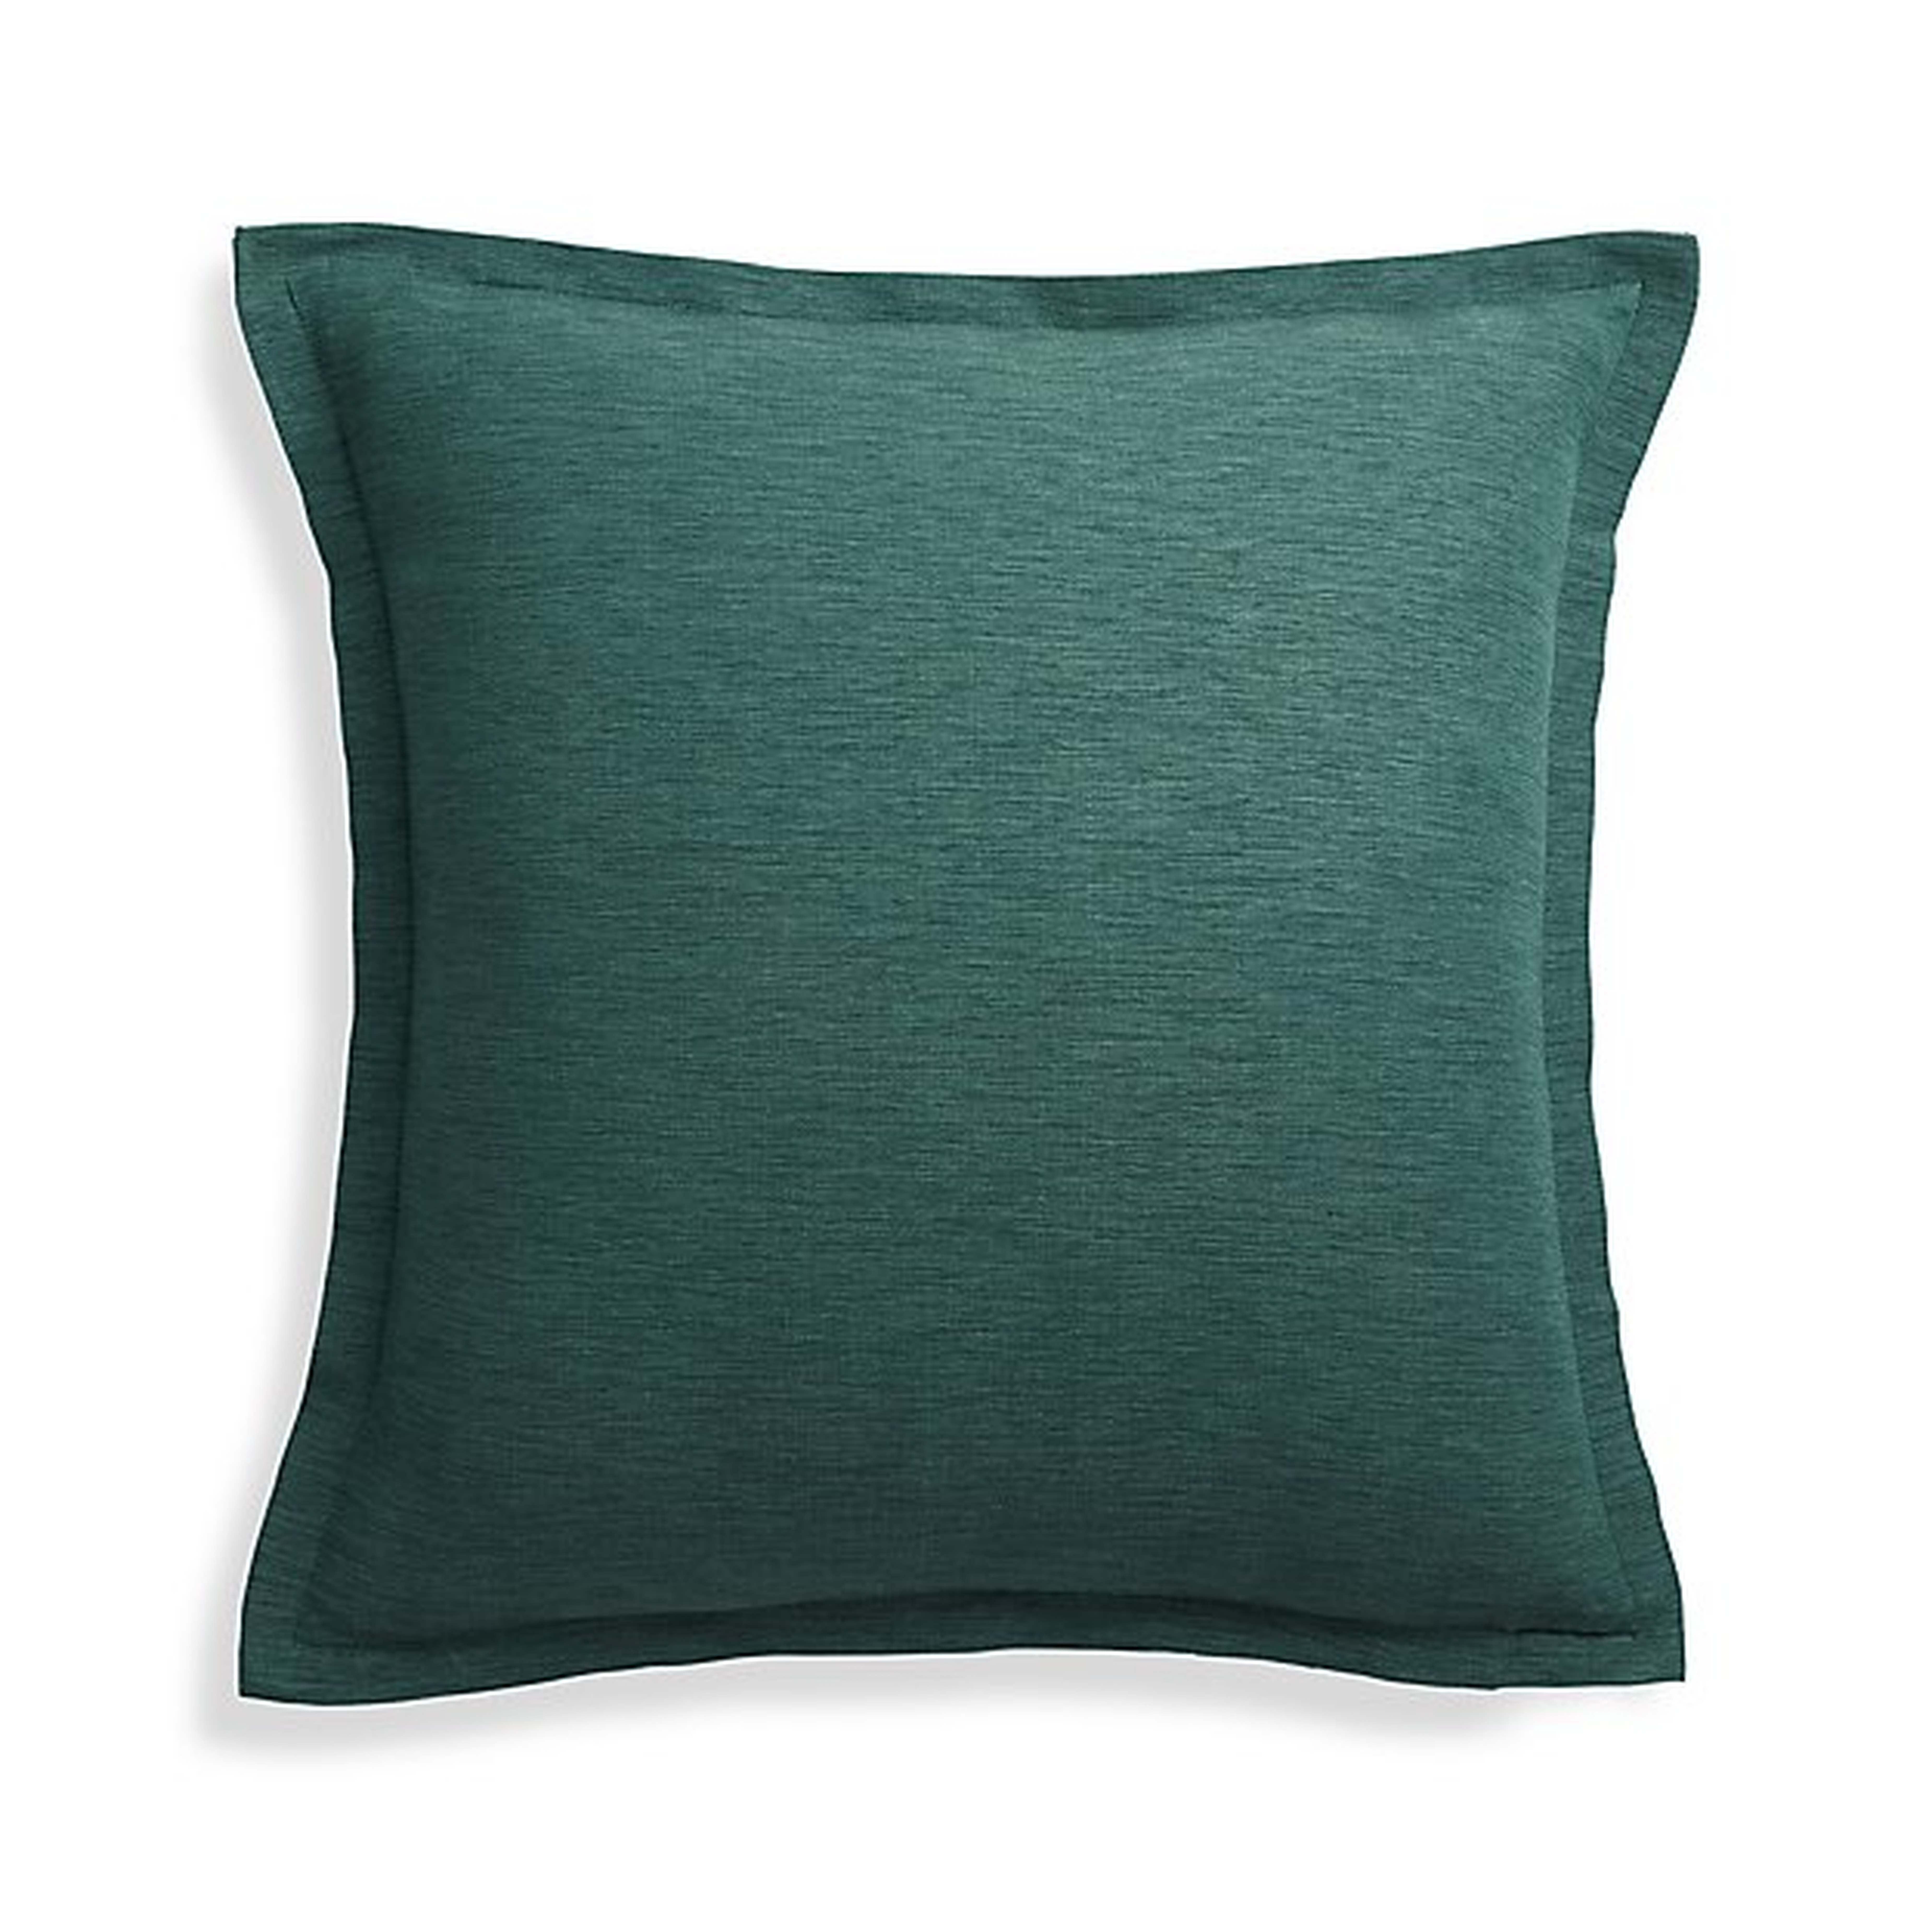 Linden Peacock 18" Pillow with Feather Down Insert - Crate and Barrel